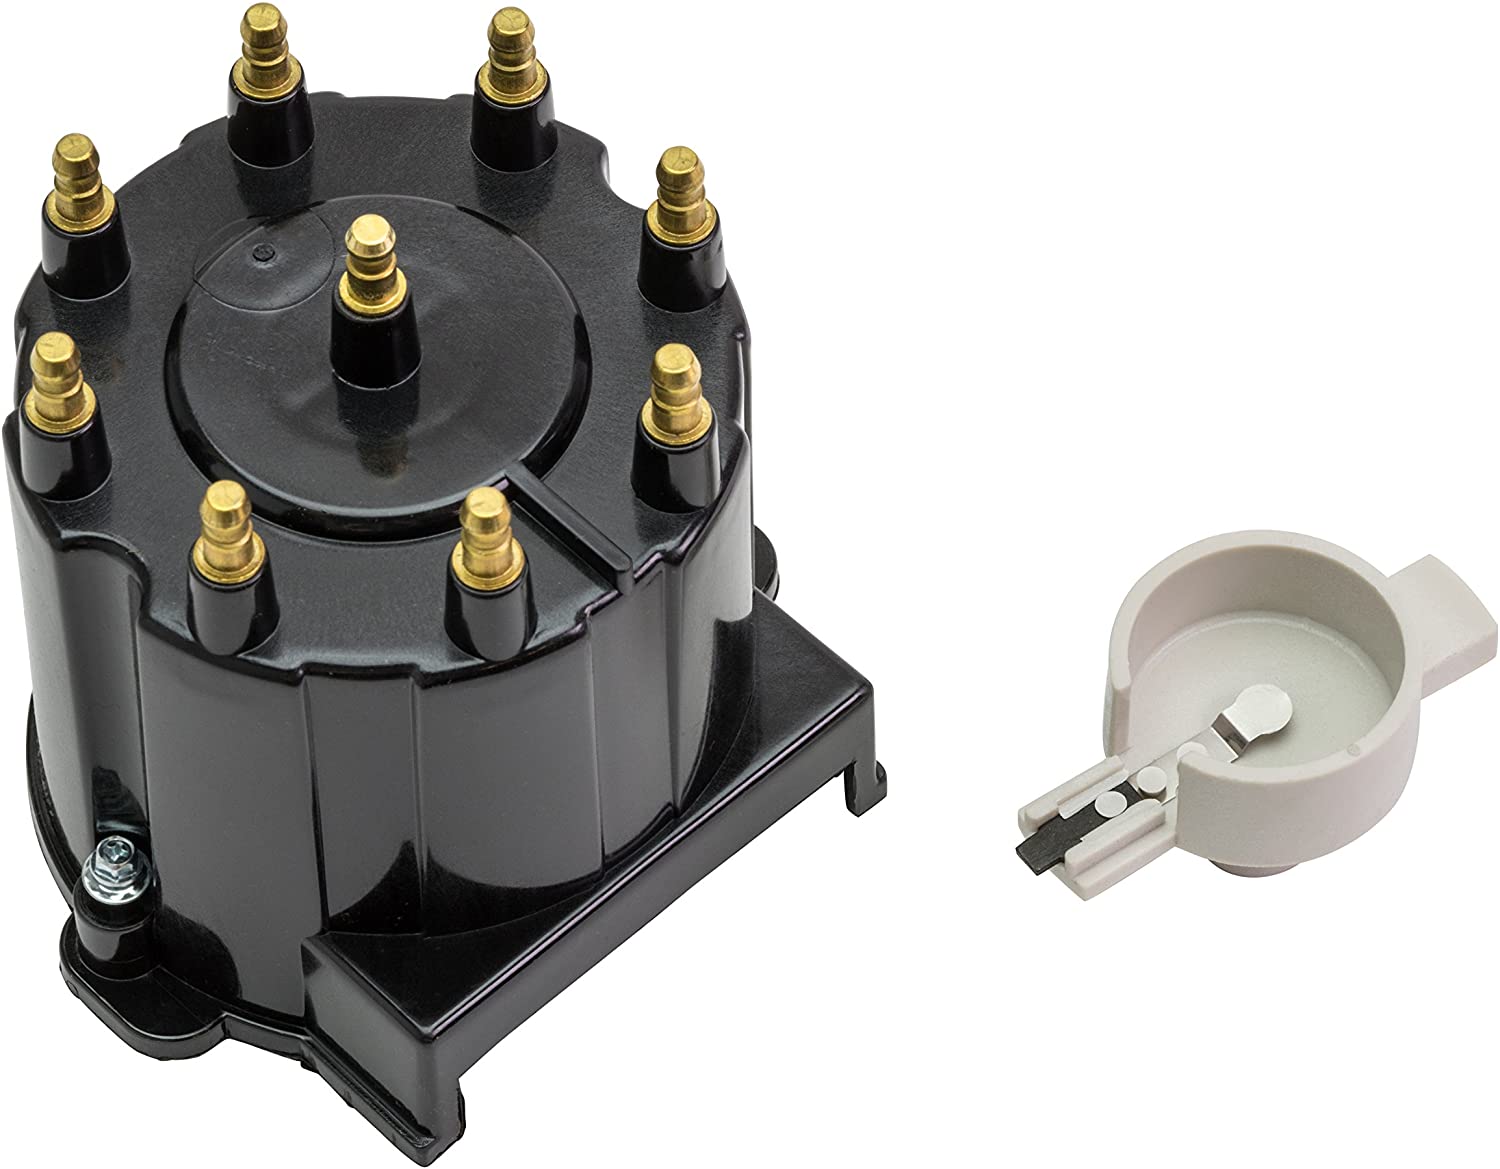 Quicksilver 808483Q1 Distributor Cap Kit - Marinized V-8 Engines by General Motors with Delco HEI Ignition Systems